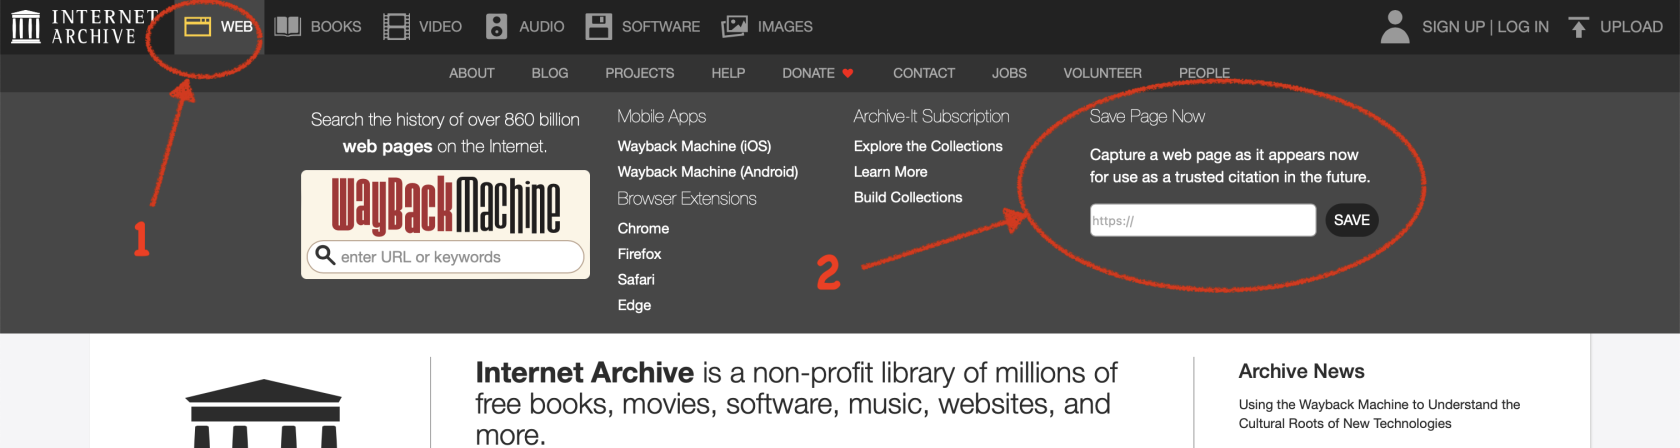 internet-archive-save.png